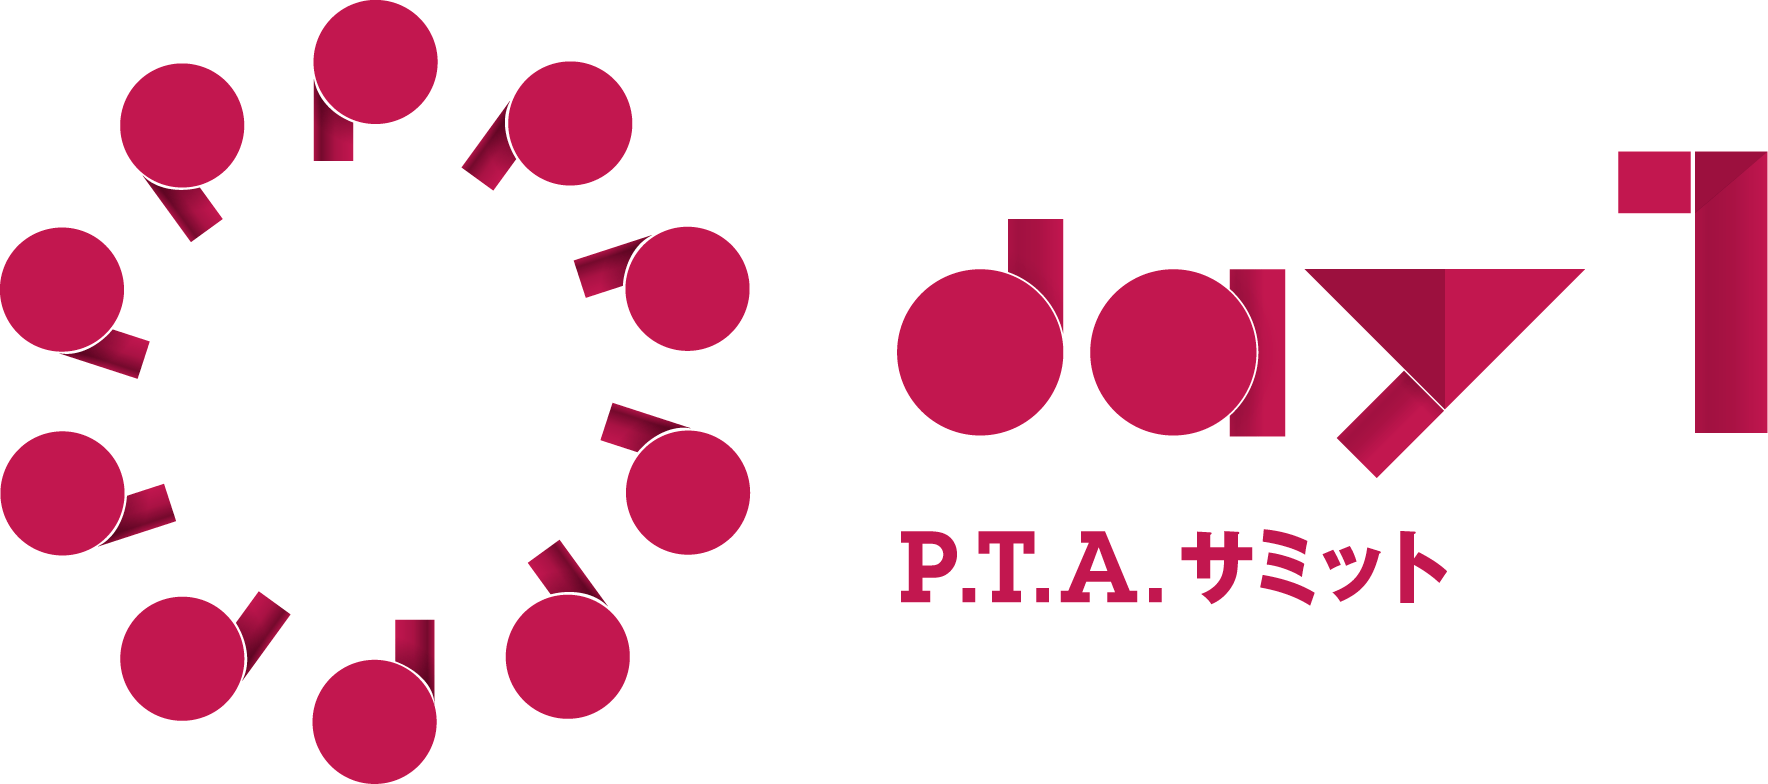 P.T.A.サミット